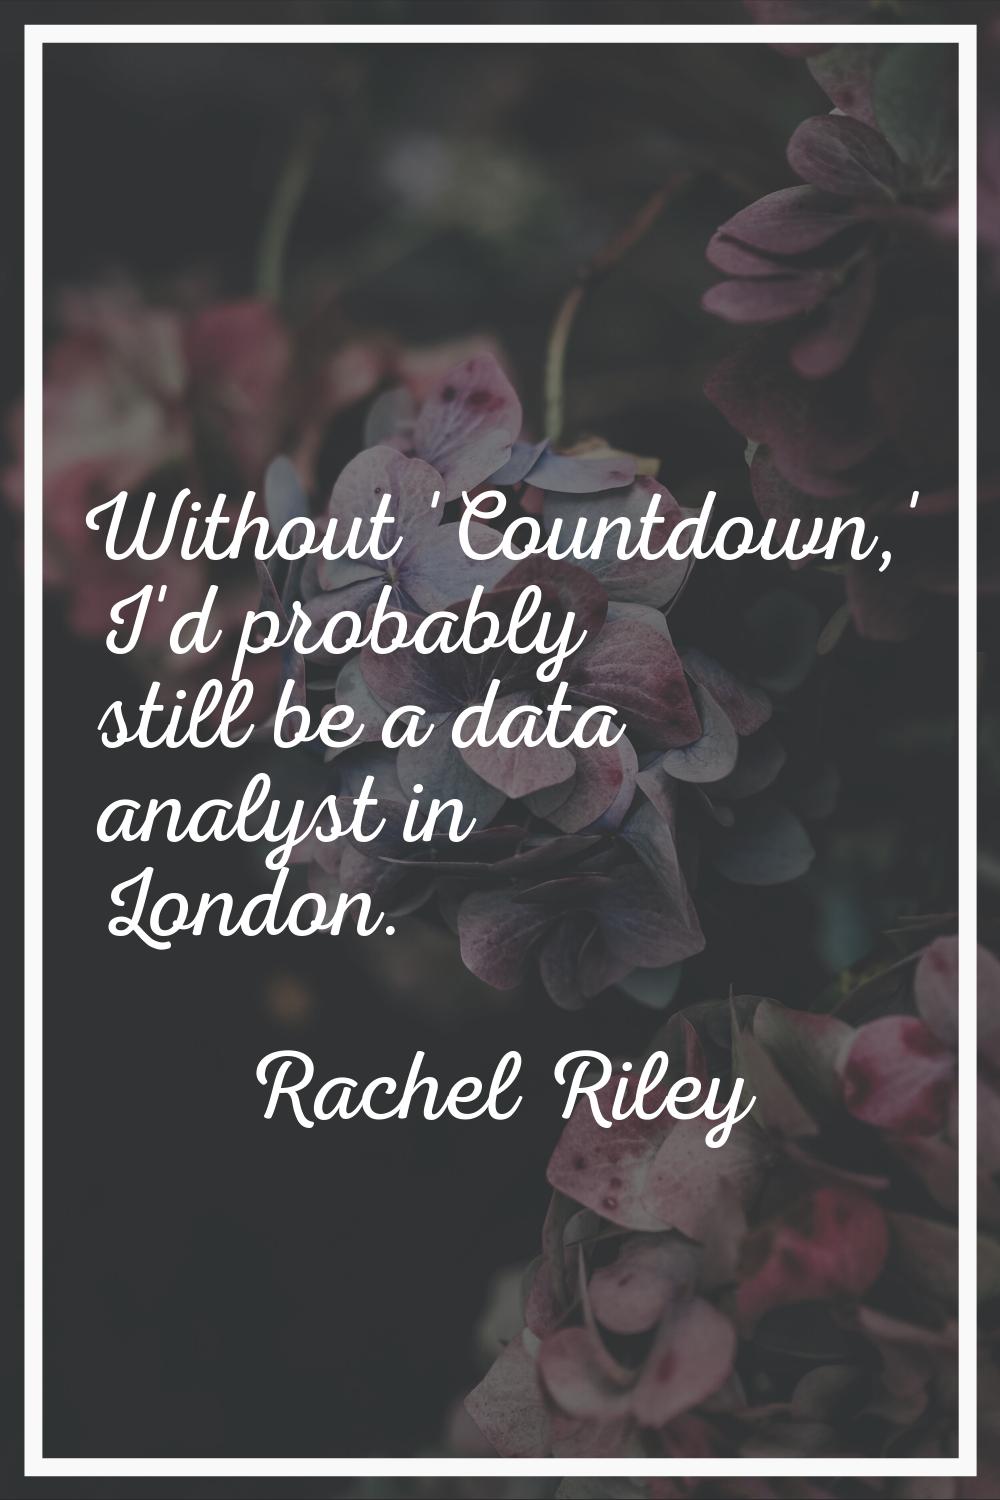 Without 'Countdown,' I'd probably still be a data analyst in London.